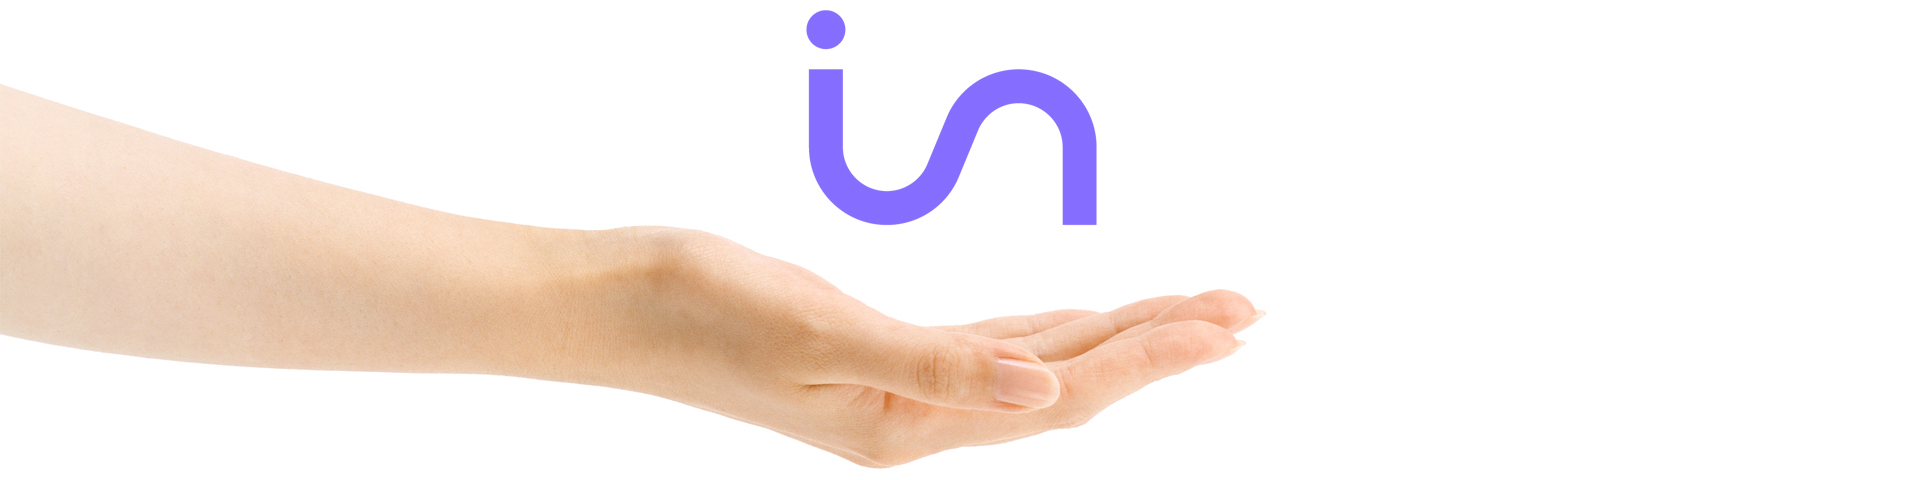 The photo shows a hand supporting the insidevision logo